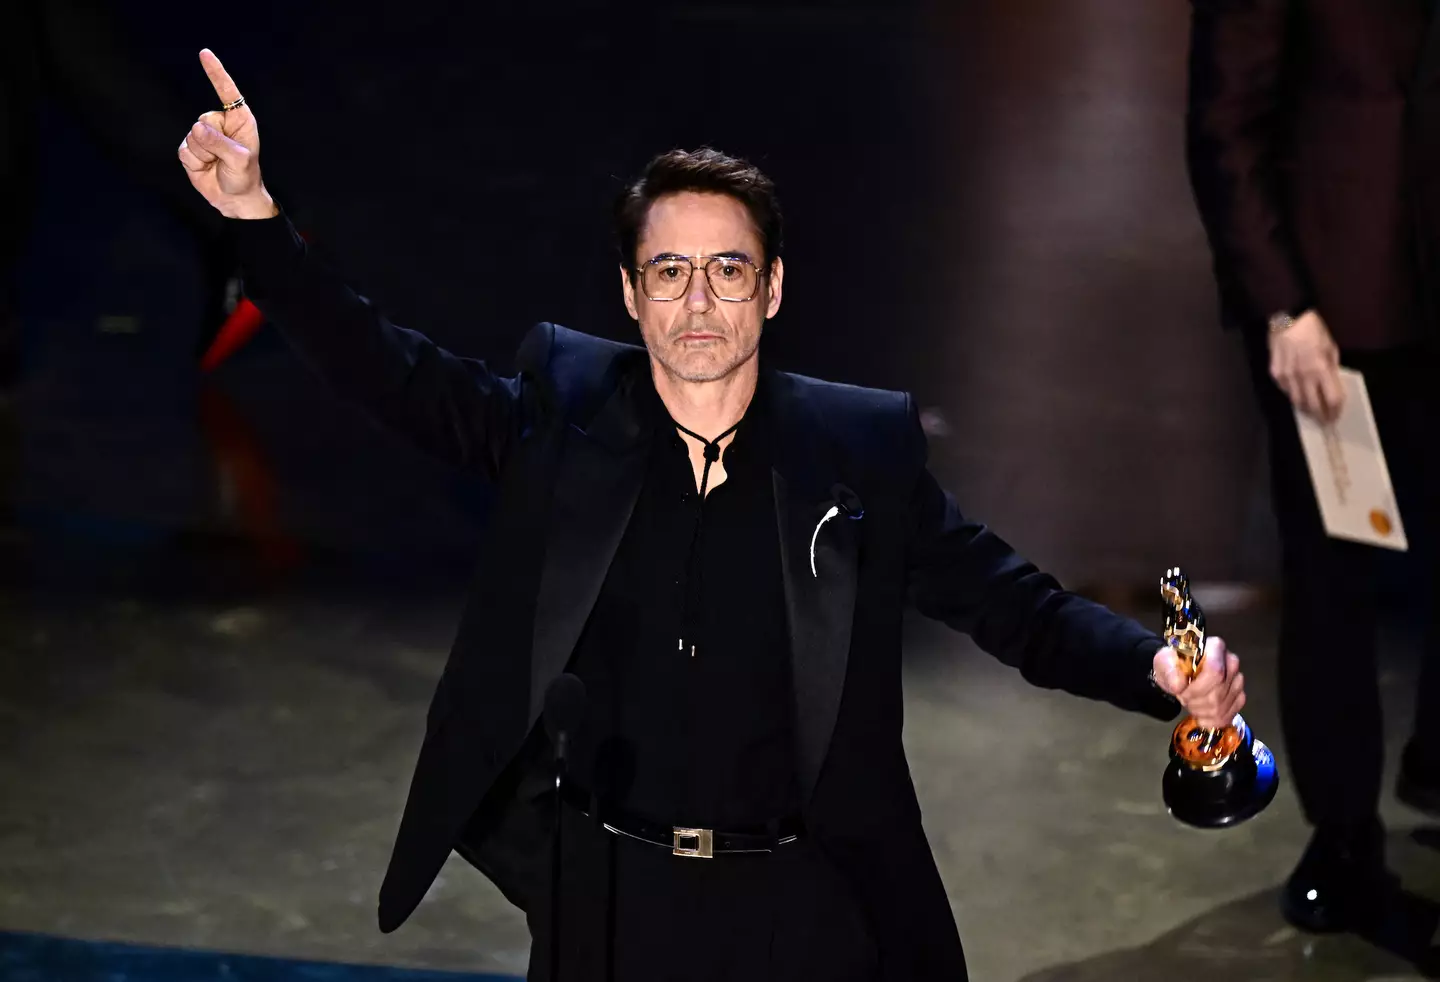 Robert Downey Jr. beat out stiff competition to win his first Oscars.PATRICK T. FALLON/AFP via Getty Images